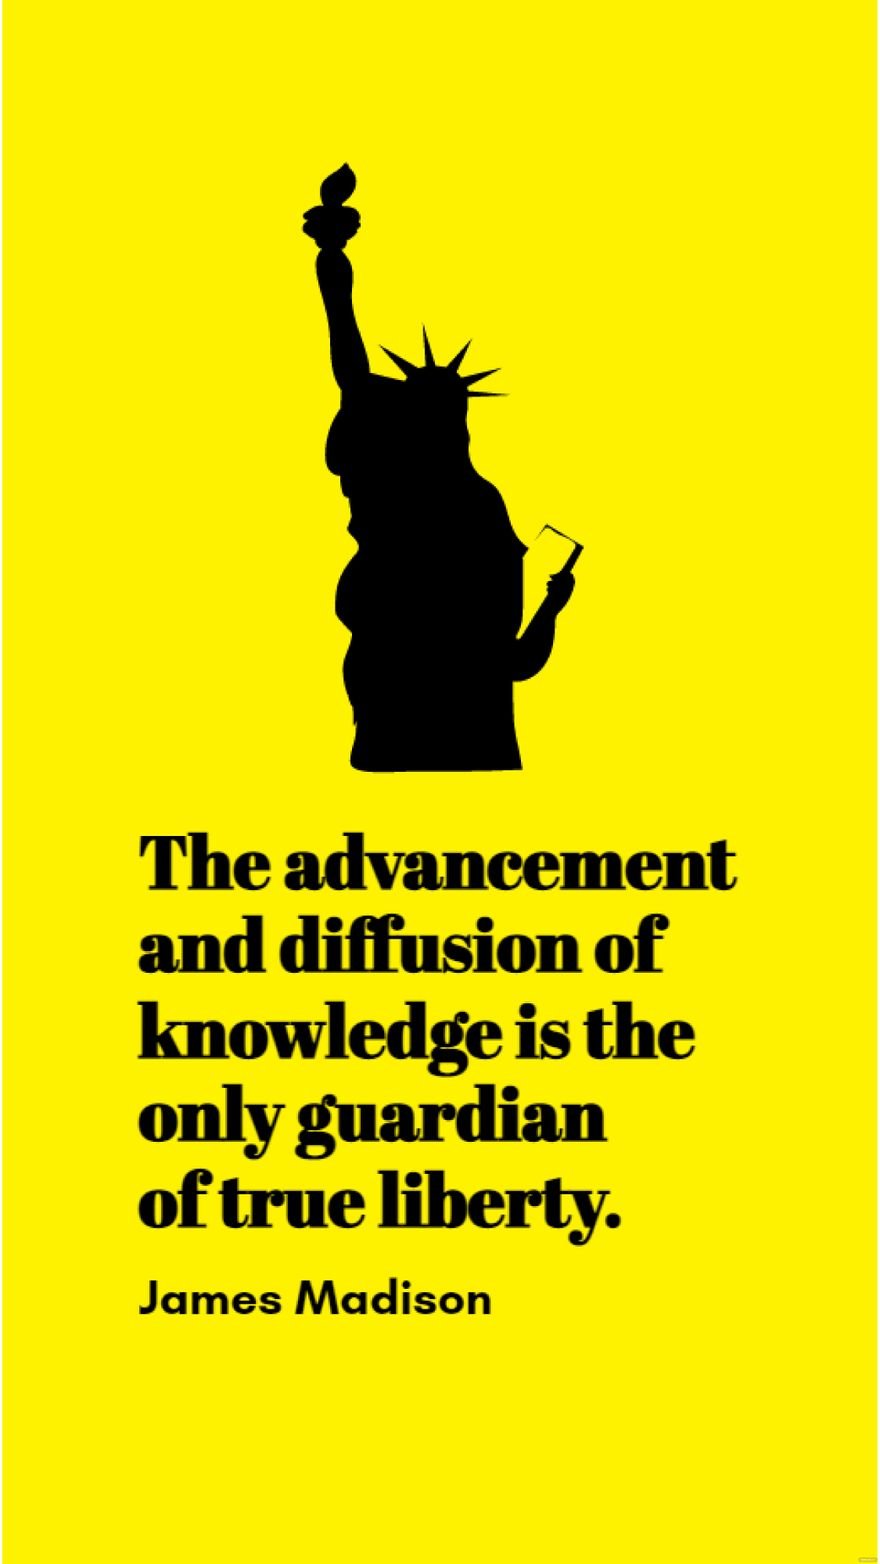 Free James Madison - The advancement and diffusion of knowledge is the only guardian of true liberty.